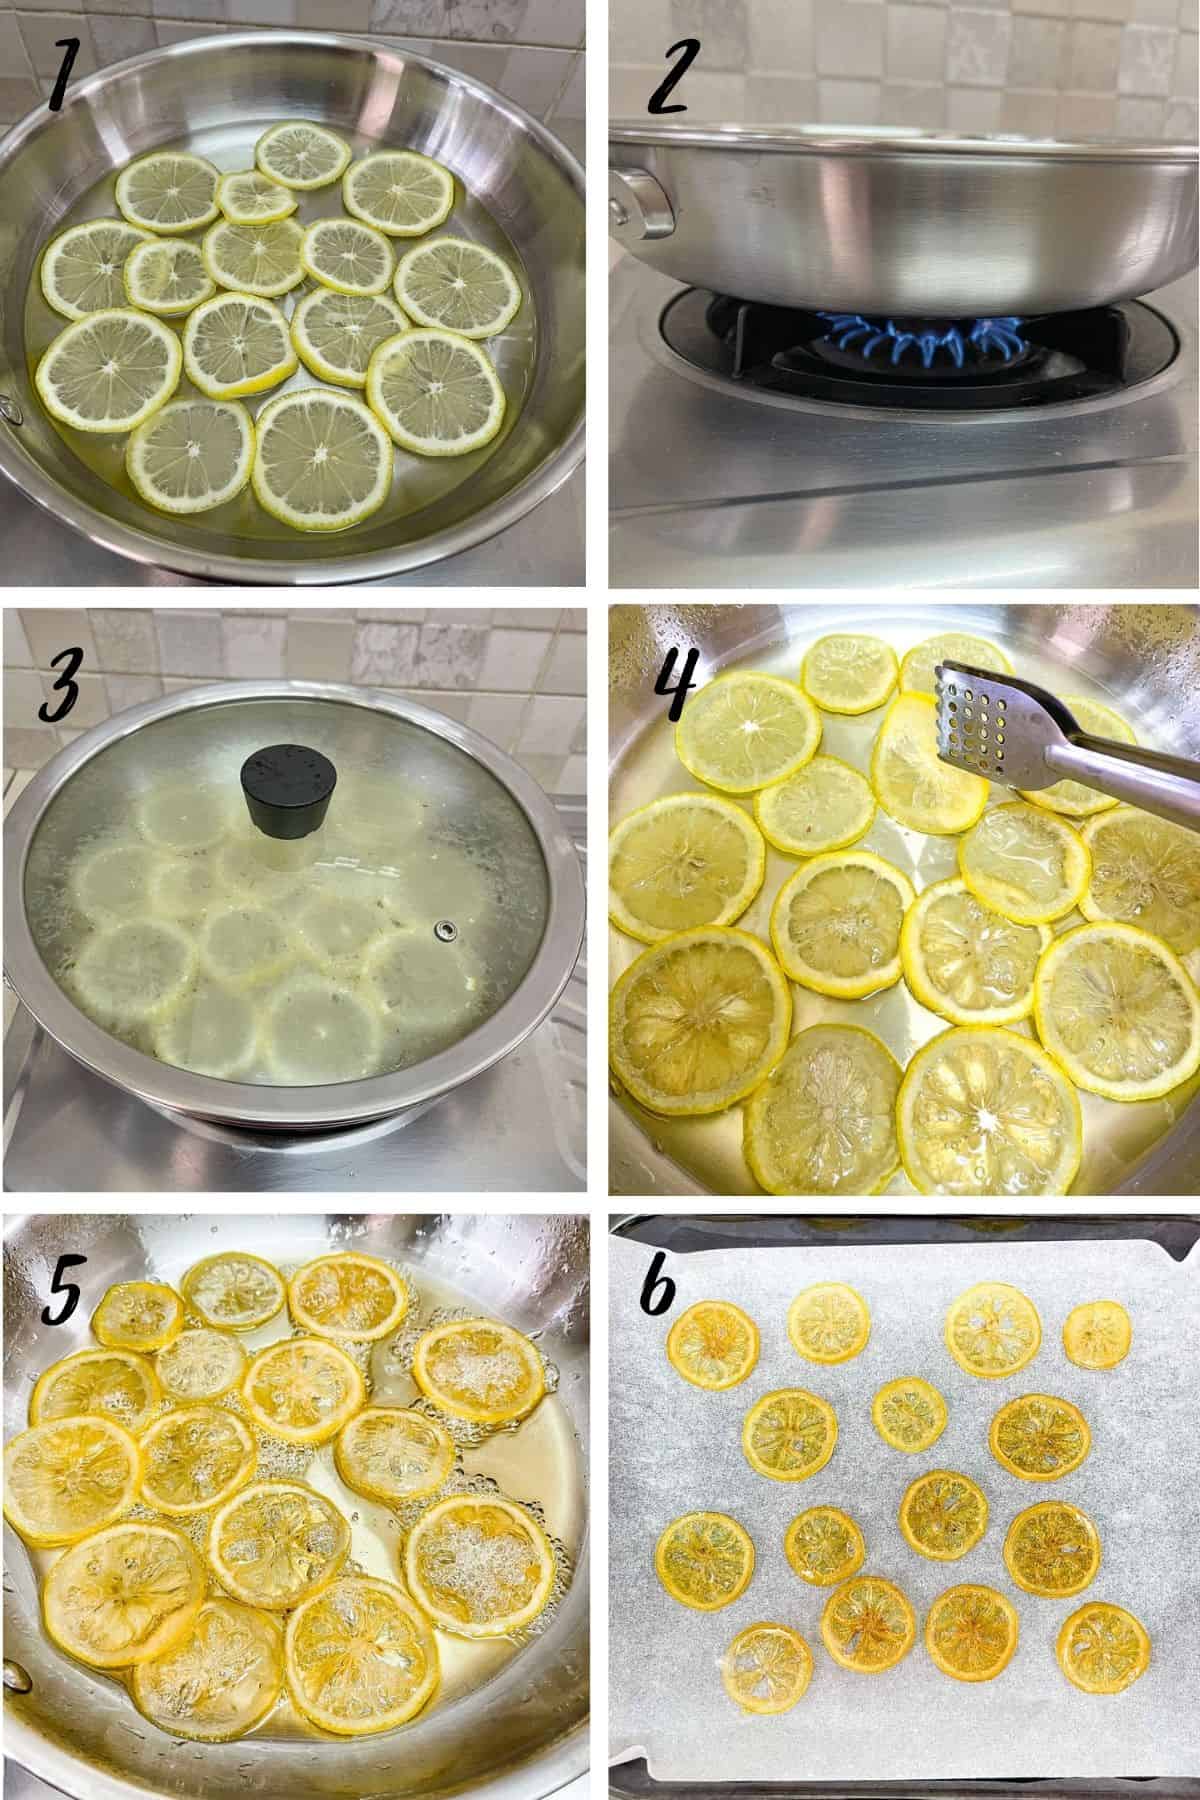 A poster of 6 images showing how to cook citrus.